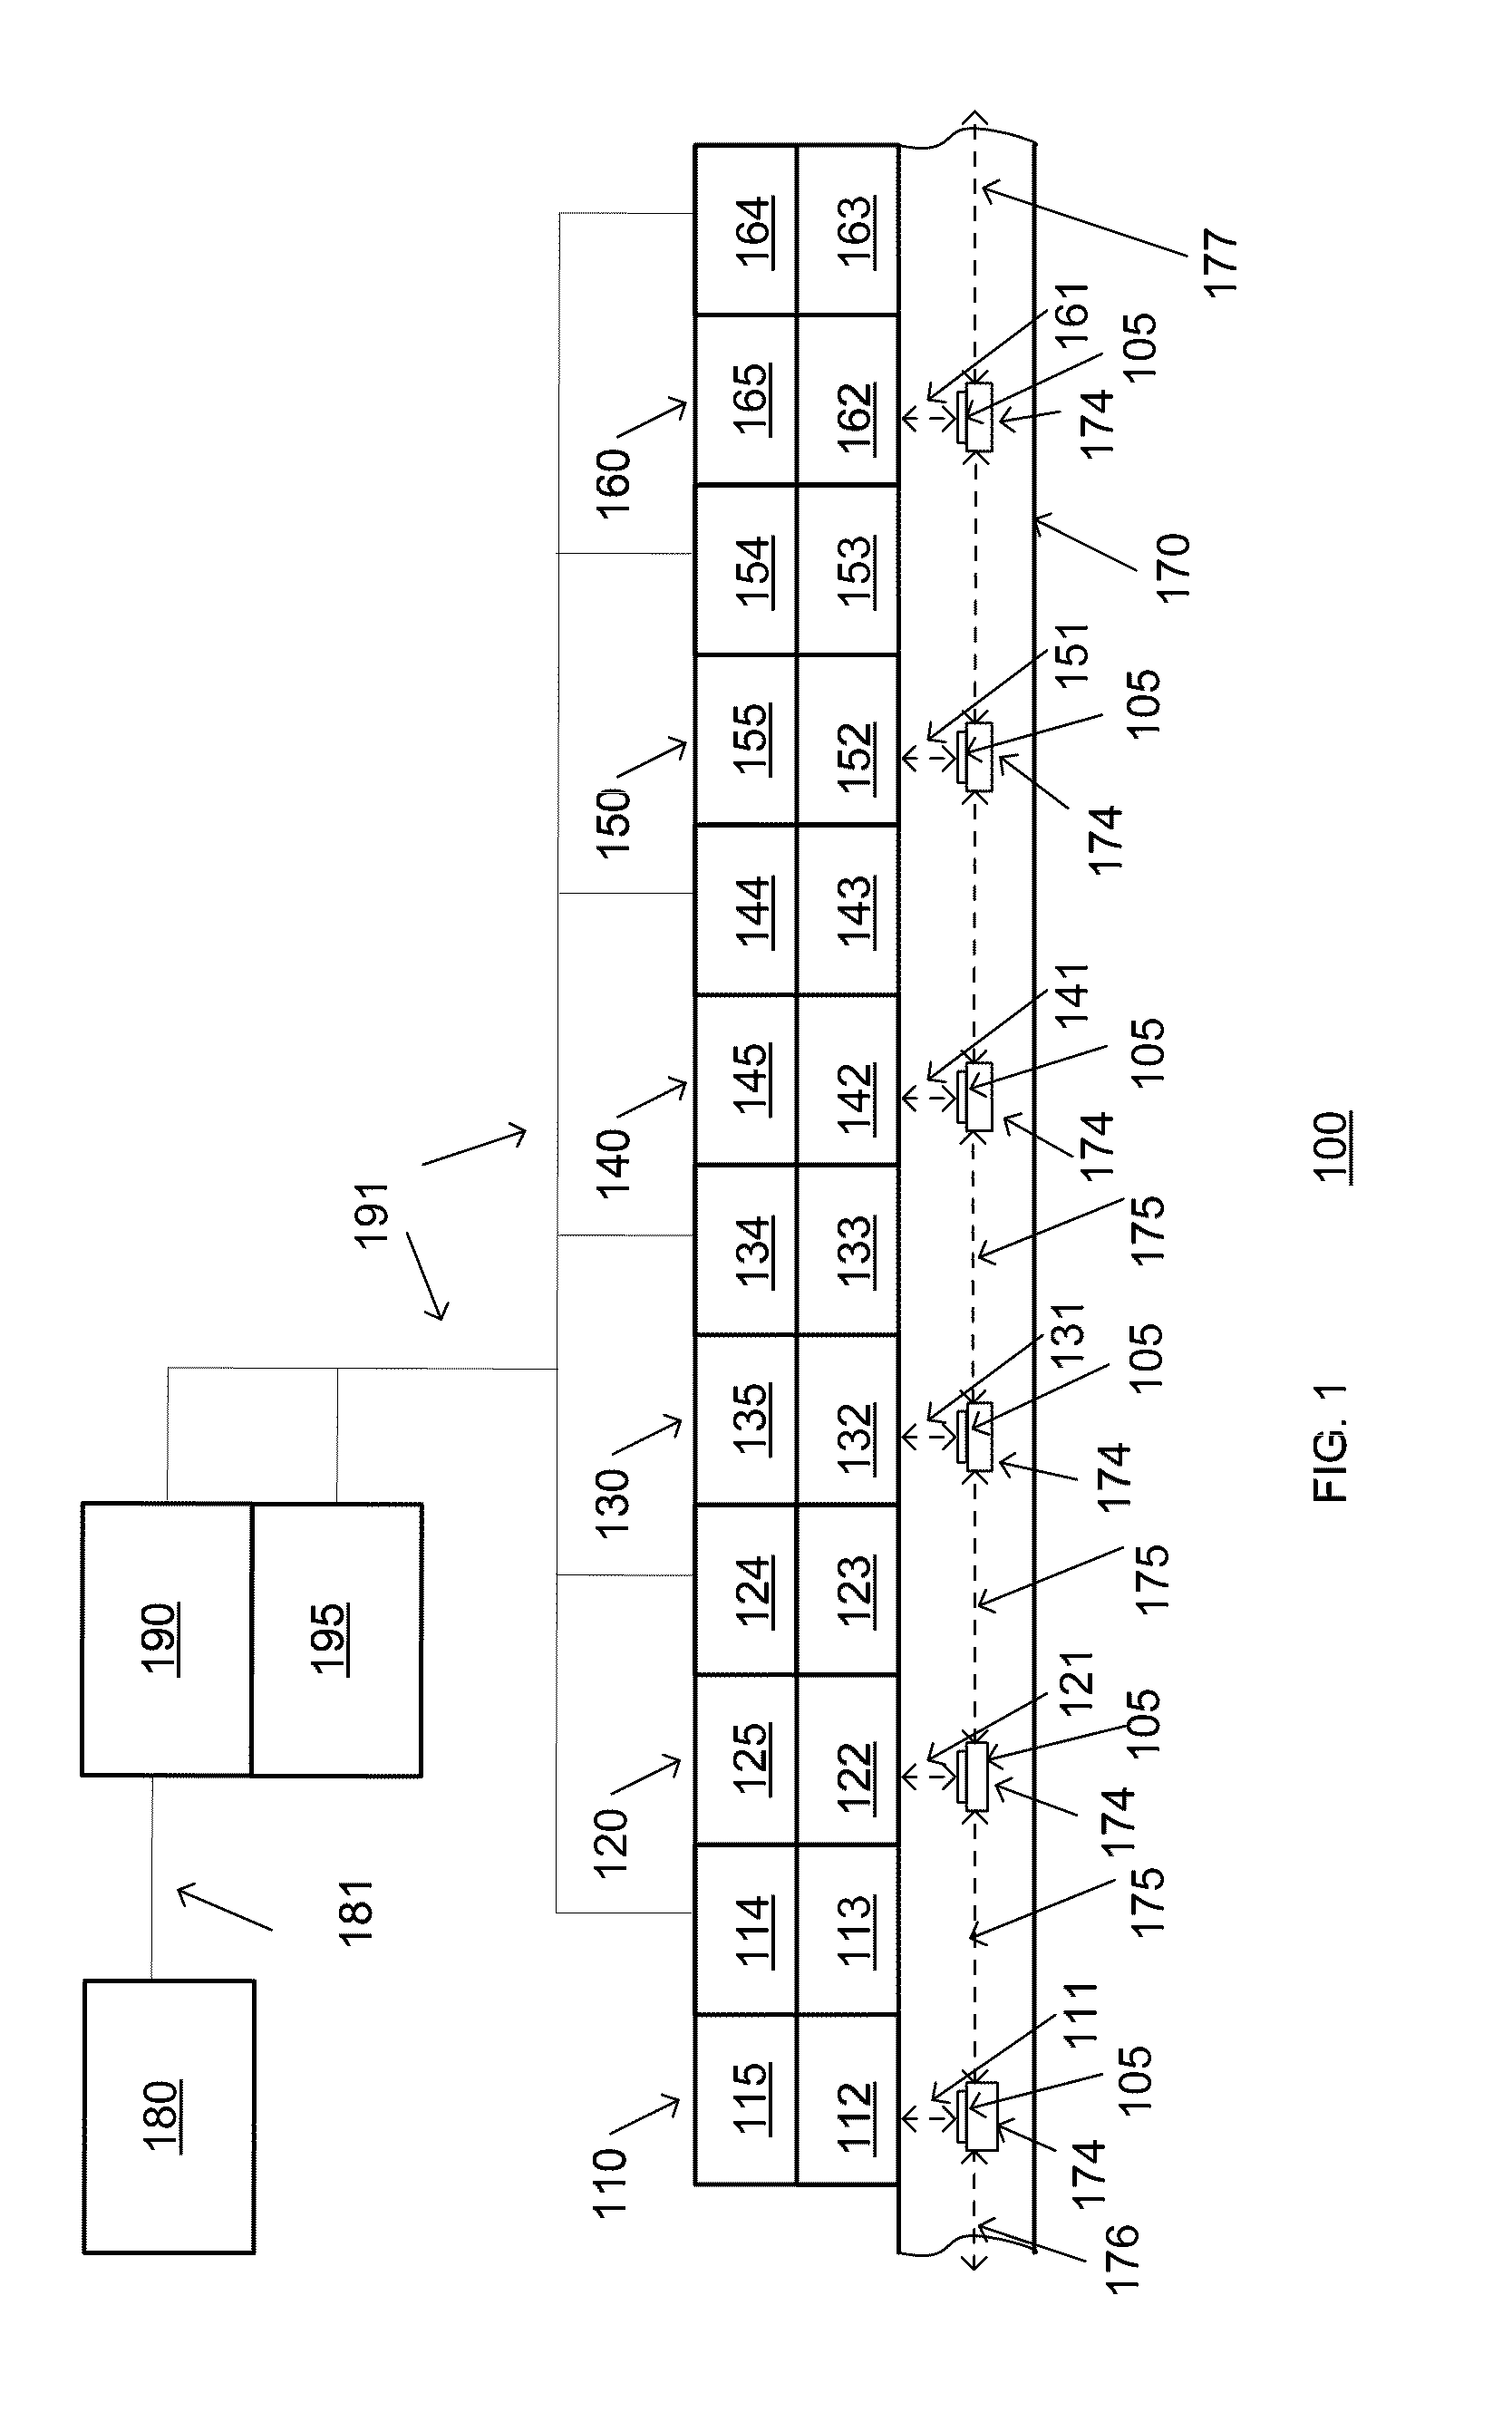 Apparatus and Method for Improving Photoresist Properties Using a Quasi-Neutral Beam